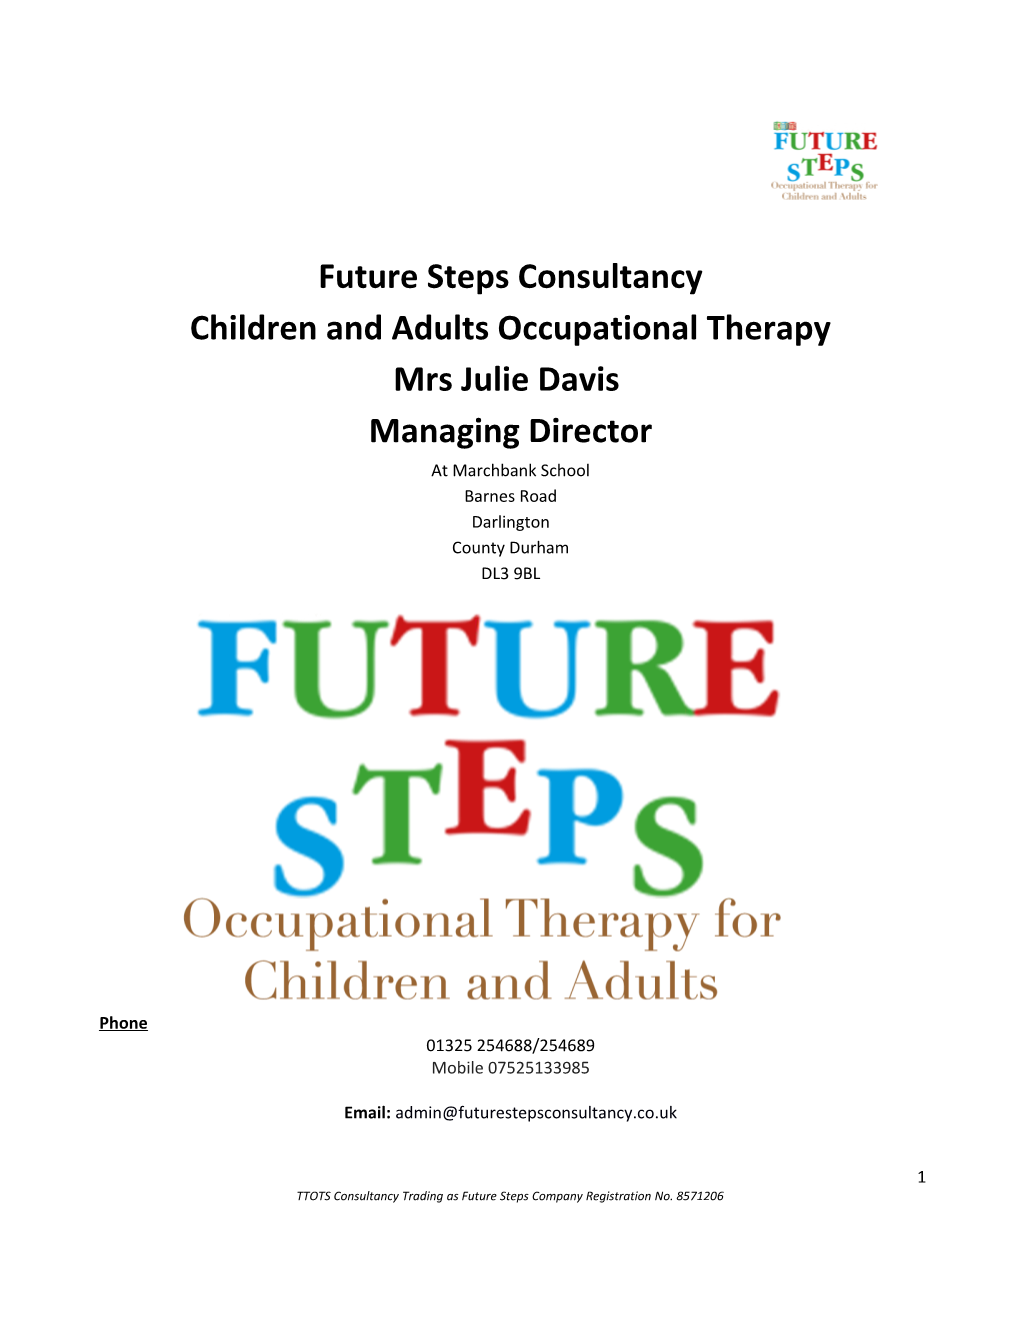 Children and Adults Occupational Therapy